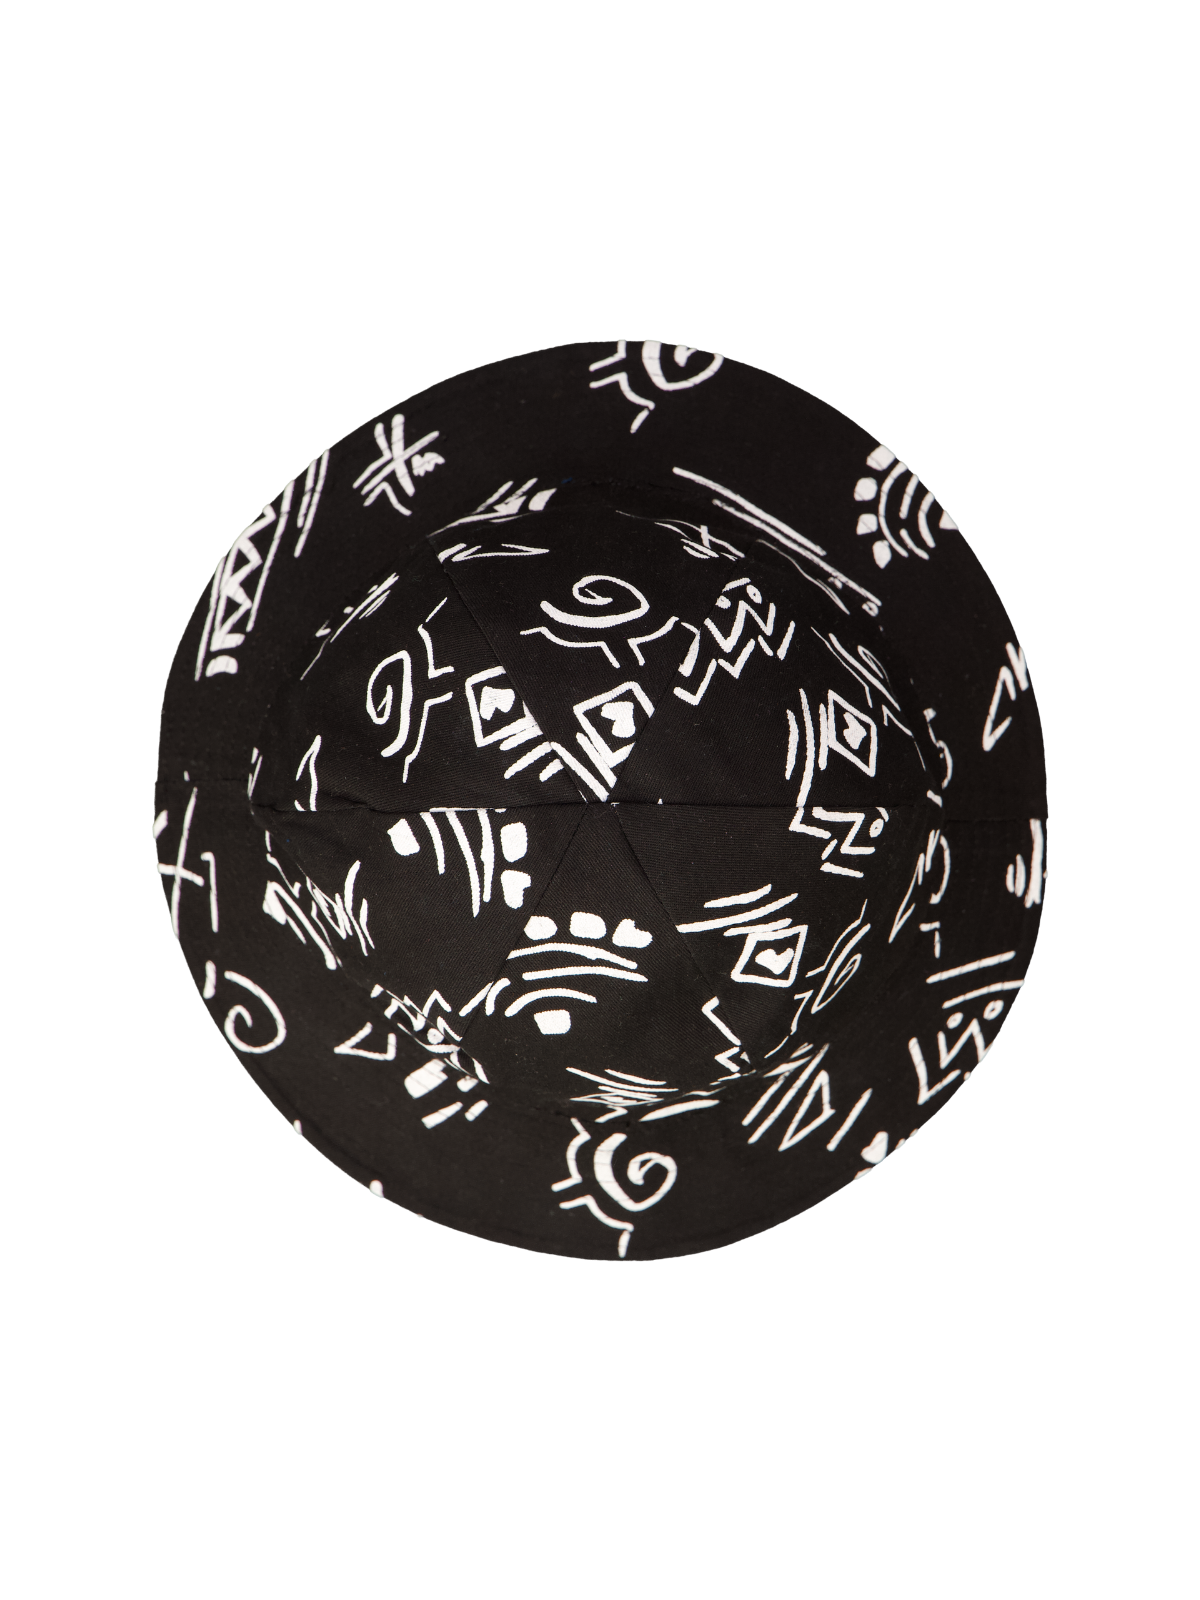 Reversible 6 Panel Black - Artclub and Friends